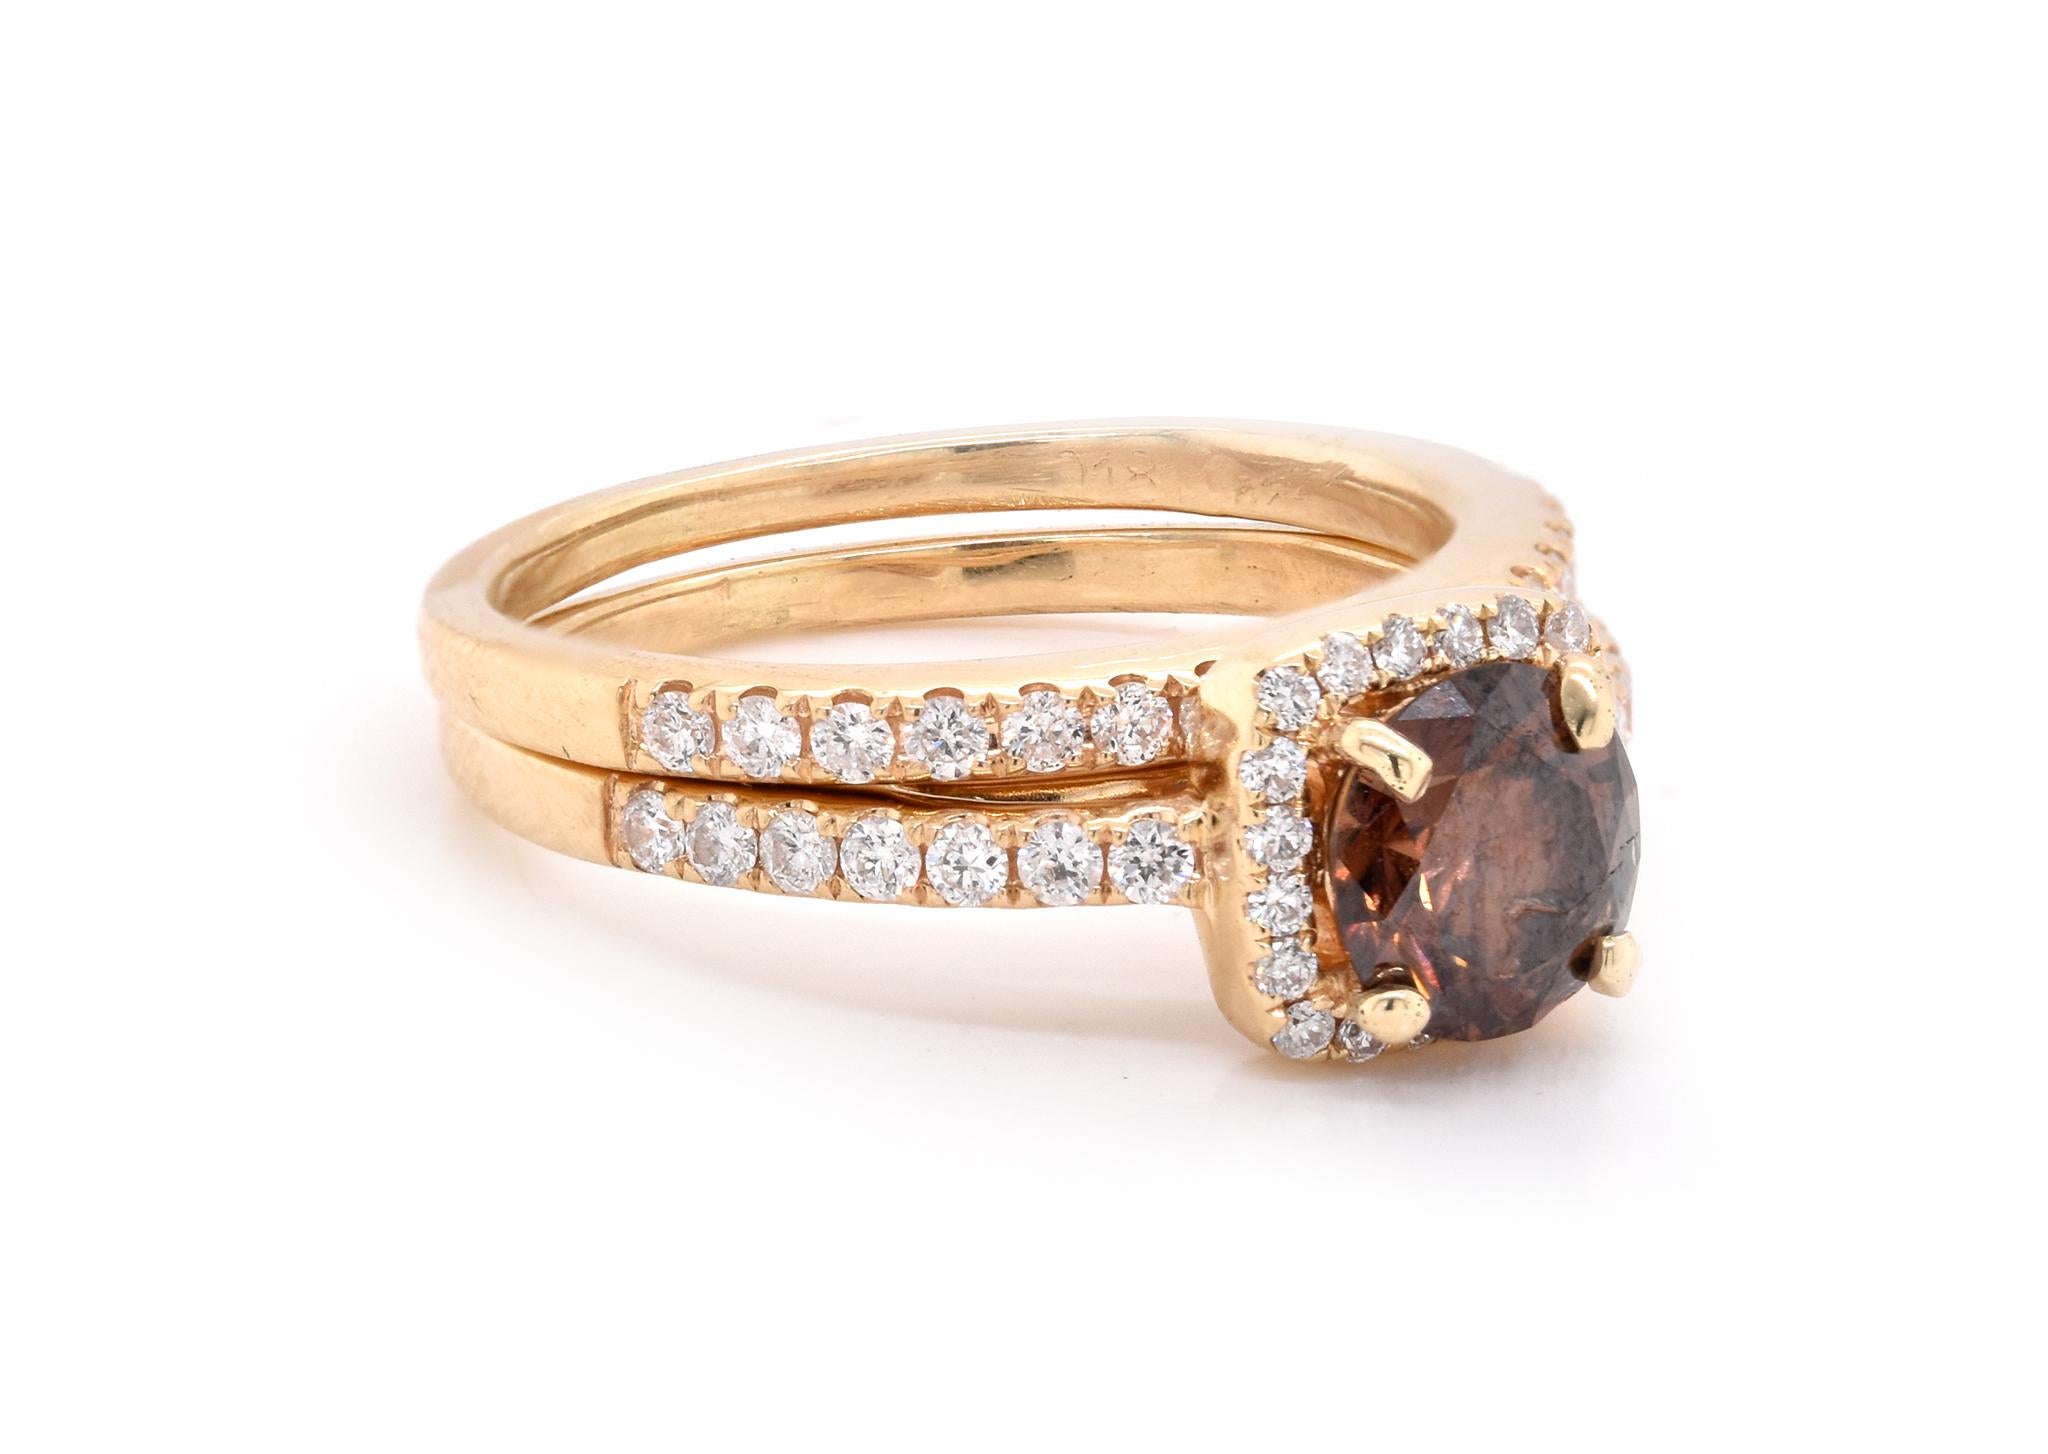 Material: 14K yellow gold
Center Diamond: 1 round brilliant cut = .90ct
Color: Chocolate
Clarity: I1
Diamonds: 31 round cut = .50cttw
Color: G
Clarity: VS2
Ring Size: 5.25 (please allow up to 2 additional business days for sizing